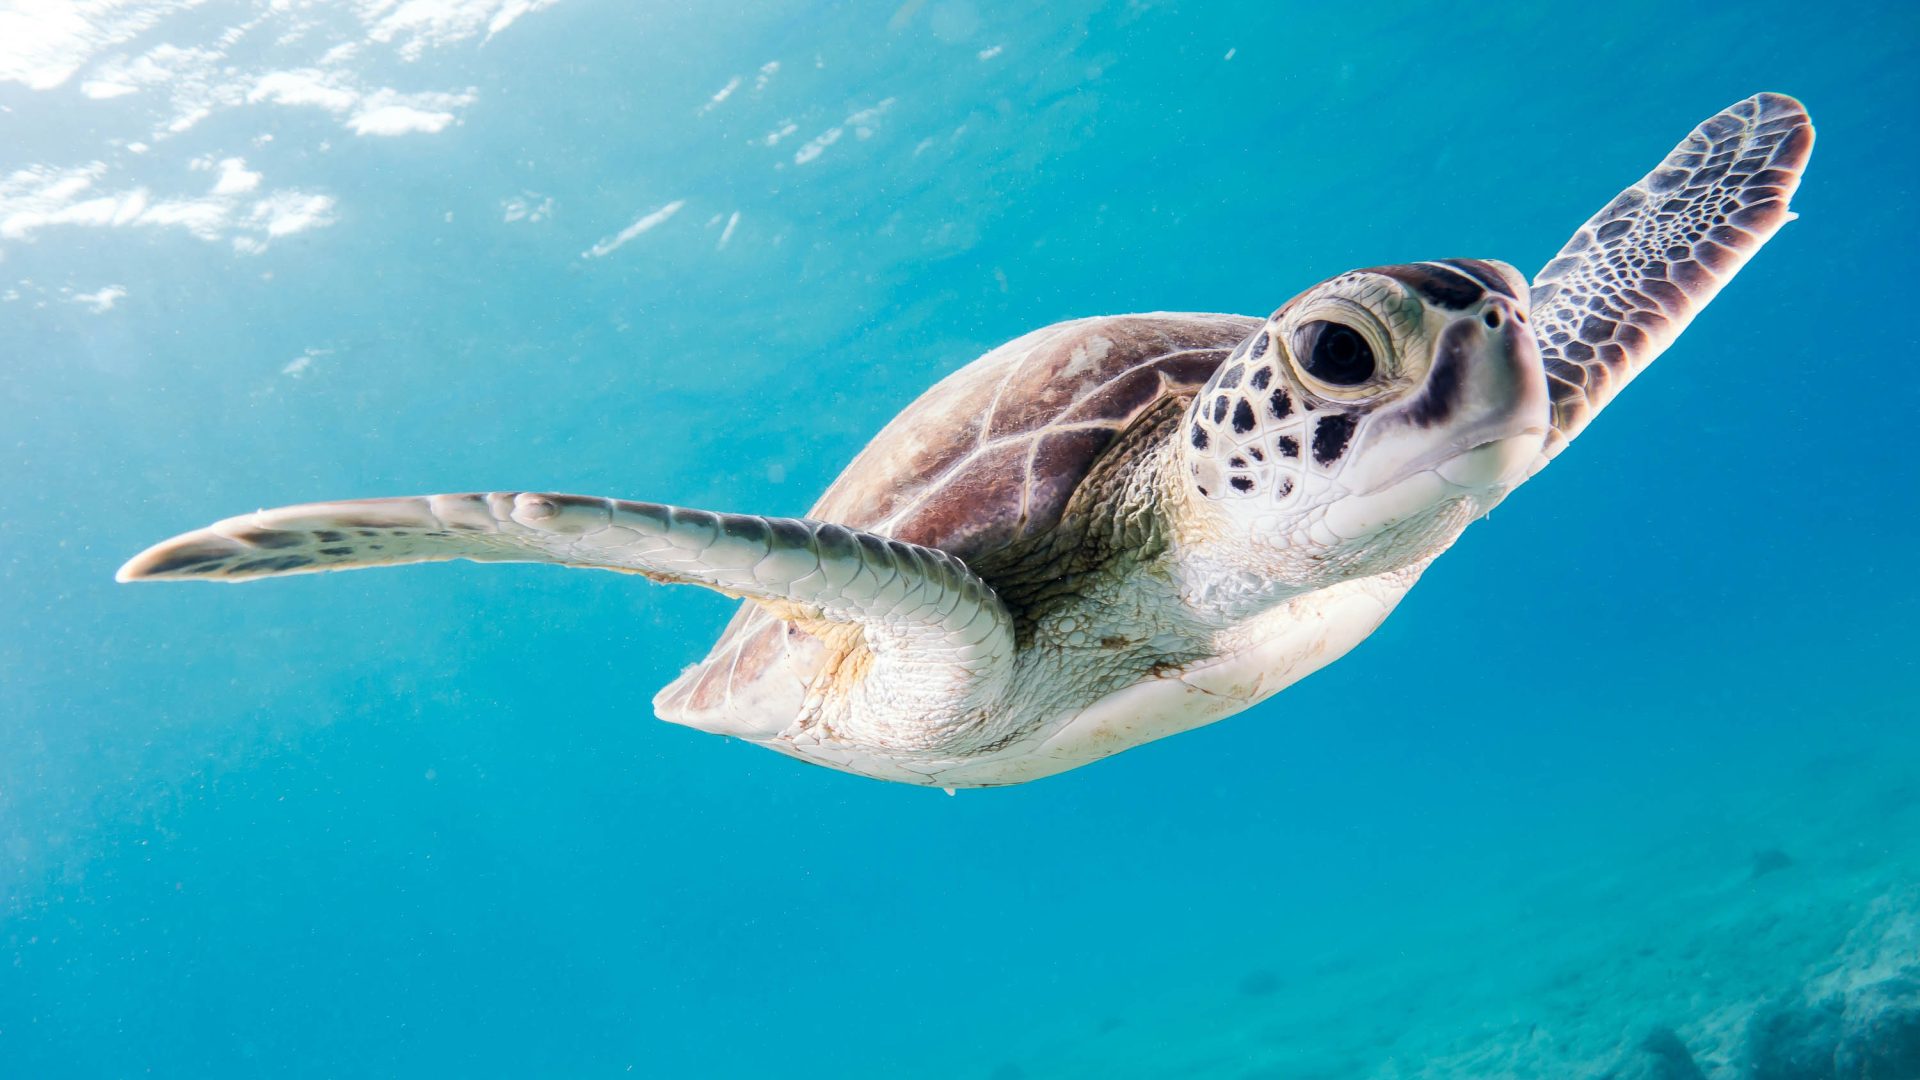 A sea turtle swims in blue water.